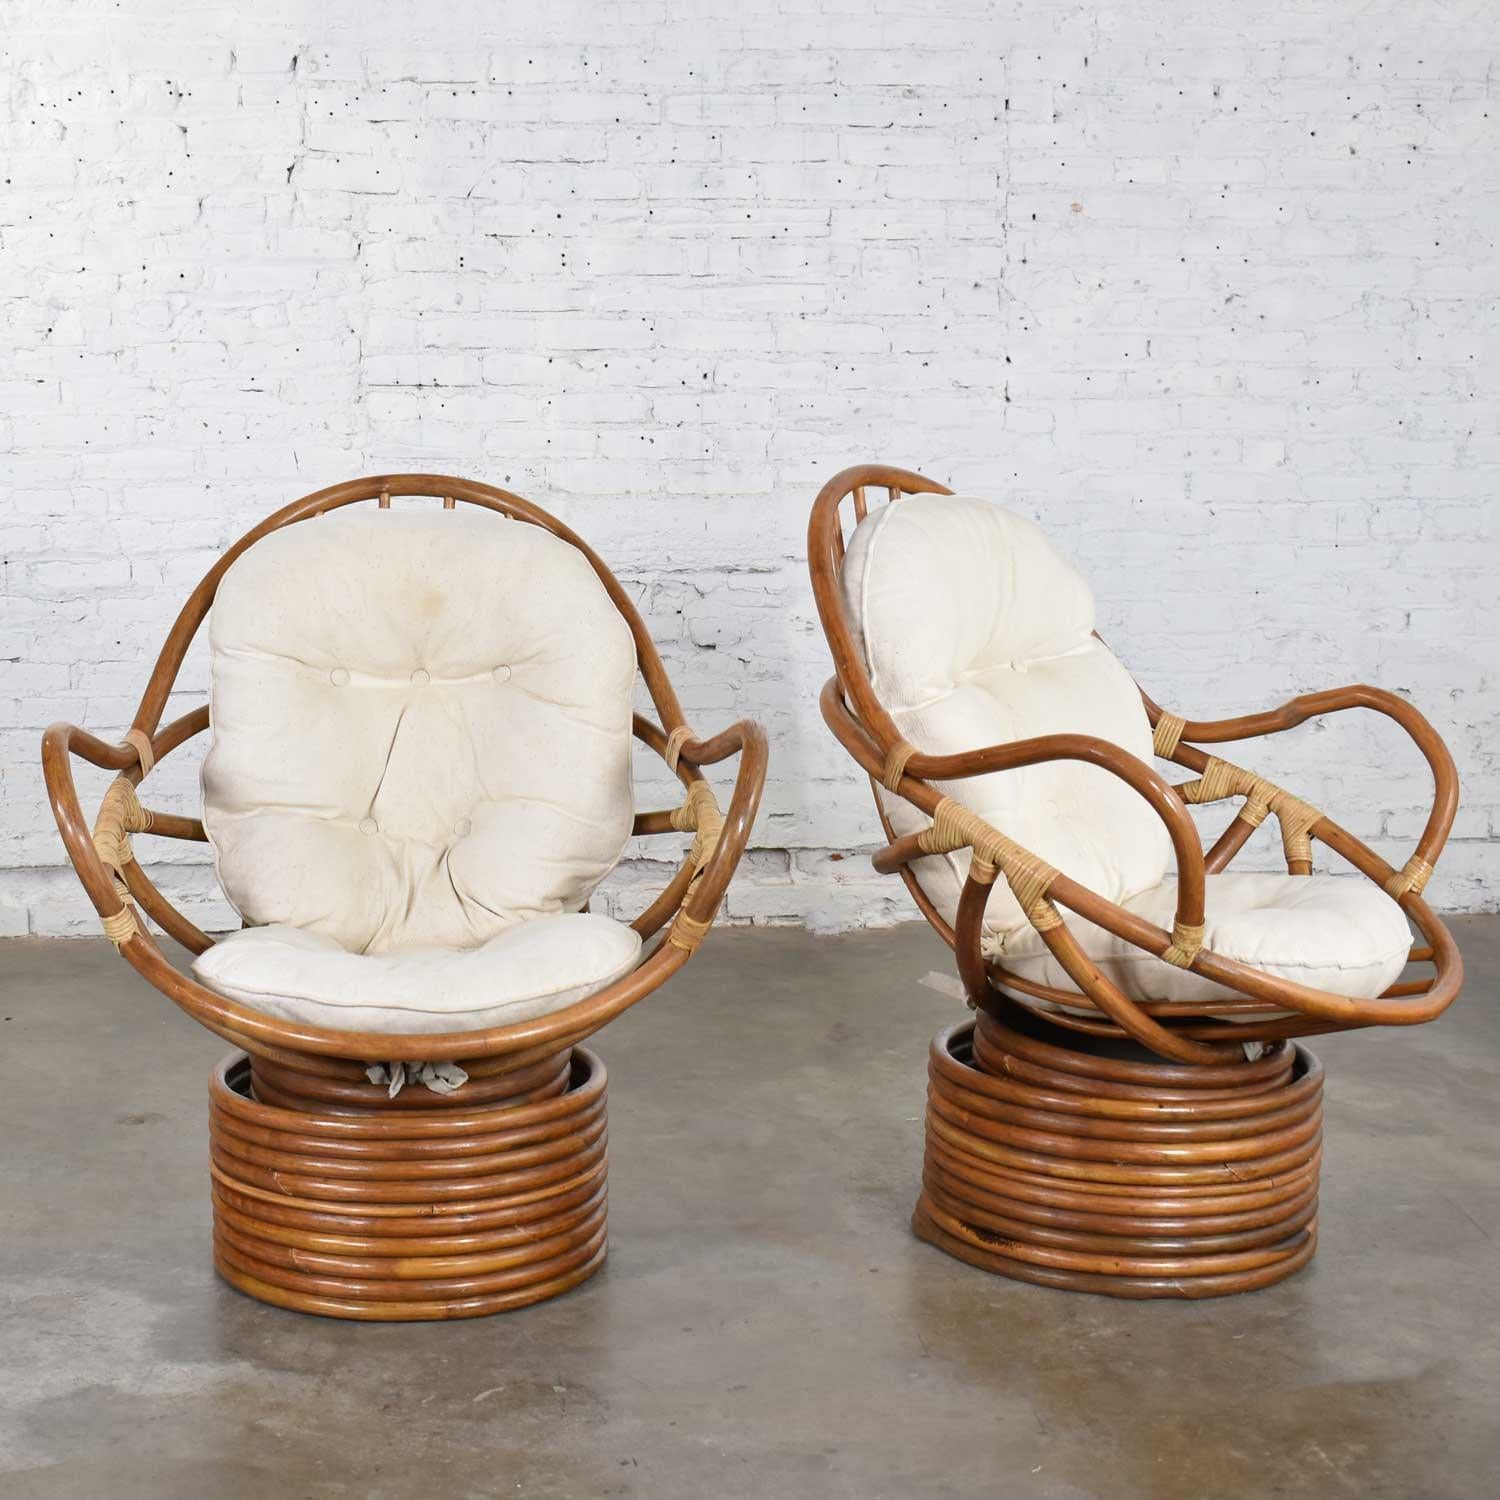 Handsome and fun pair of modern rattan swivel, Mamasan, bucket shaped lounge chairs with a white set of cushions. The chairs are in fabulous vintage condition. All the rattan needed was a good cleaning. The cushions have some stains so most likely